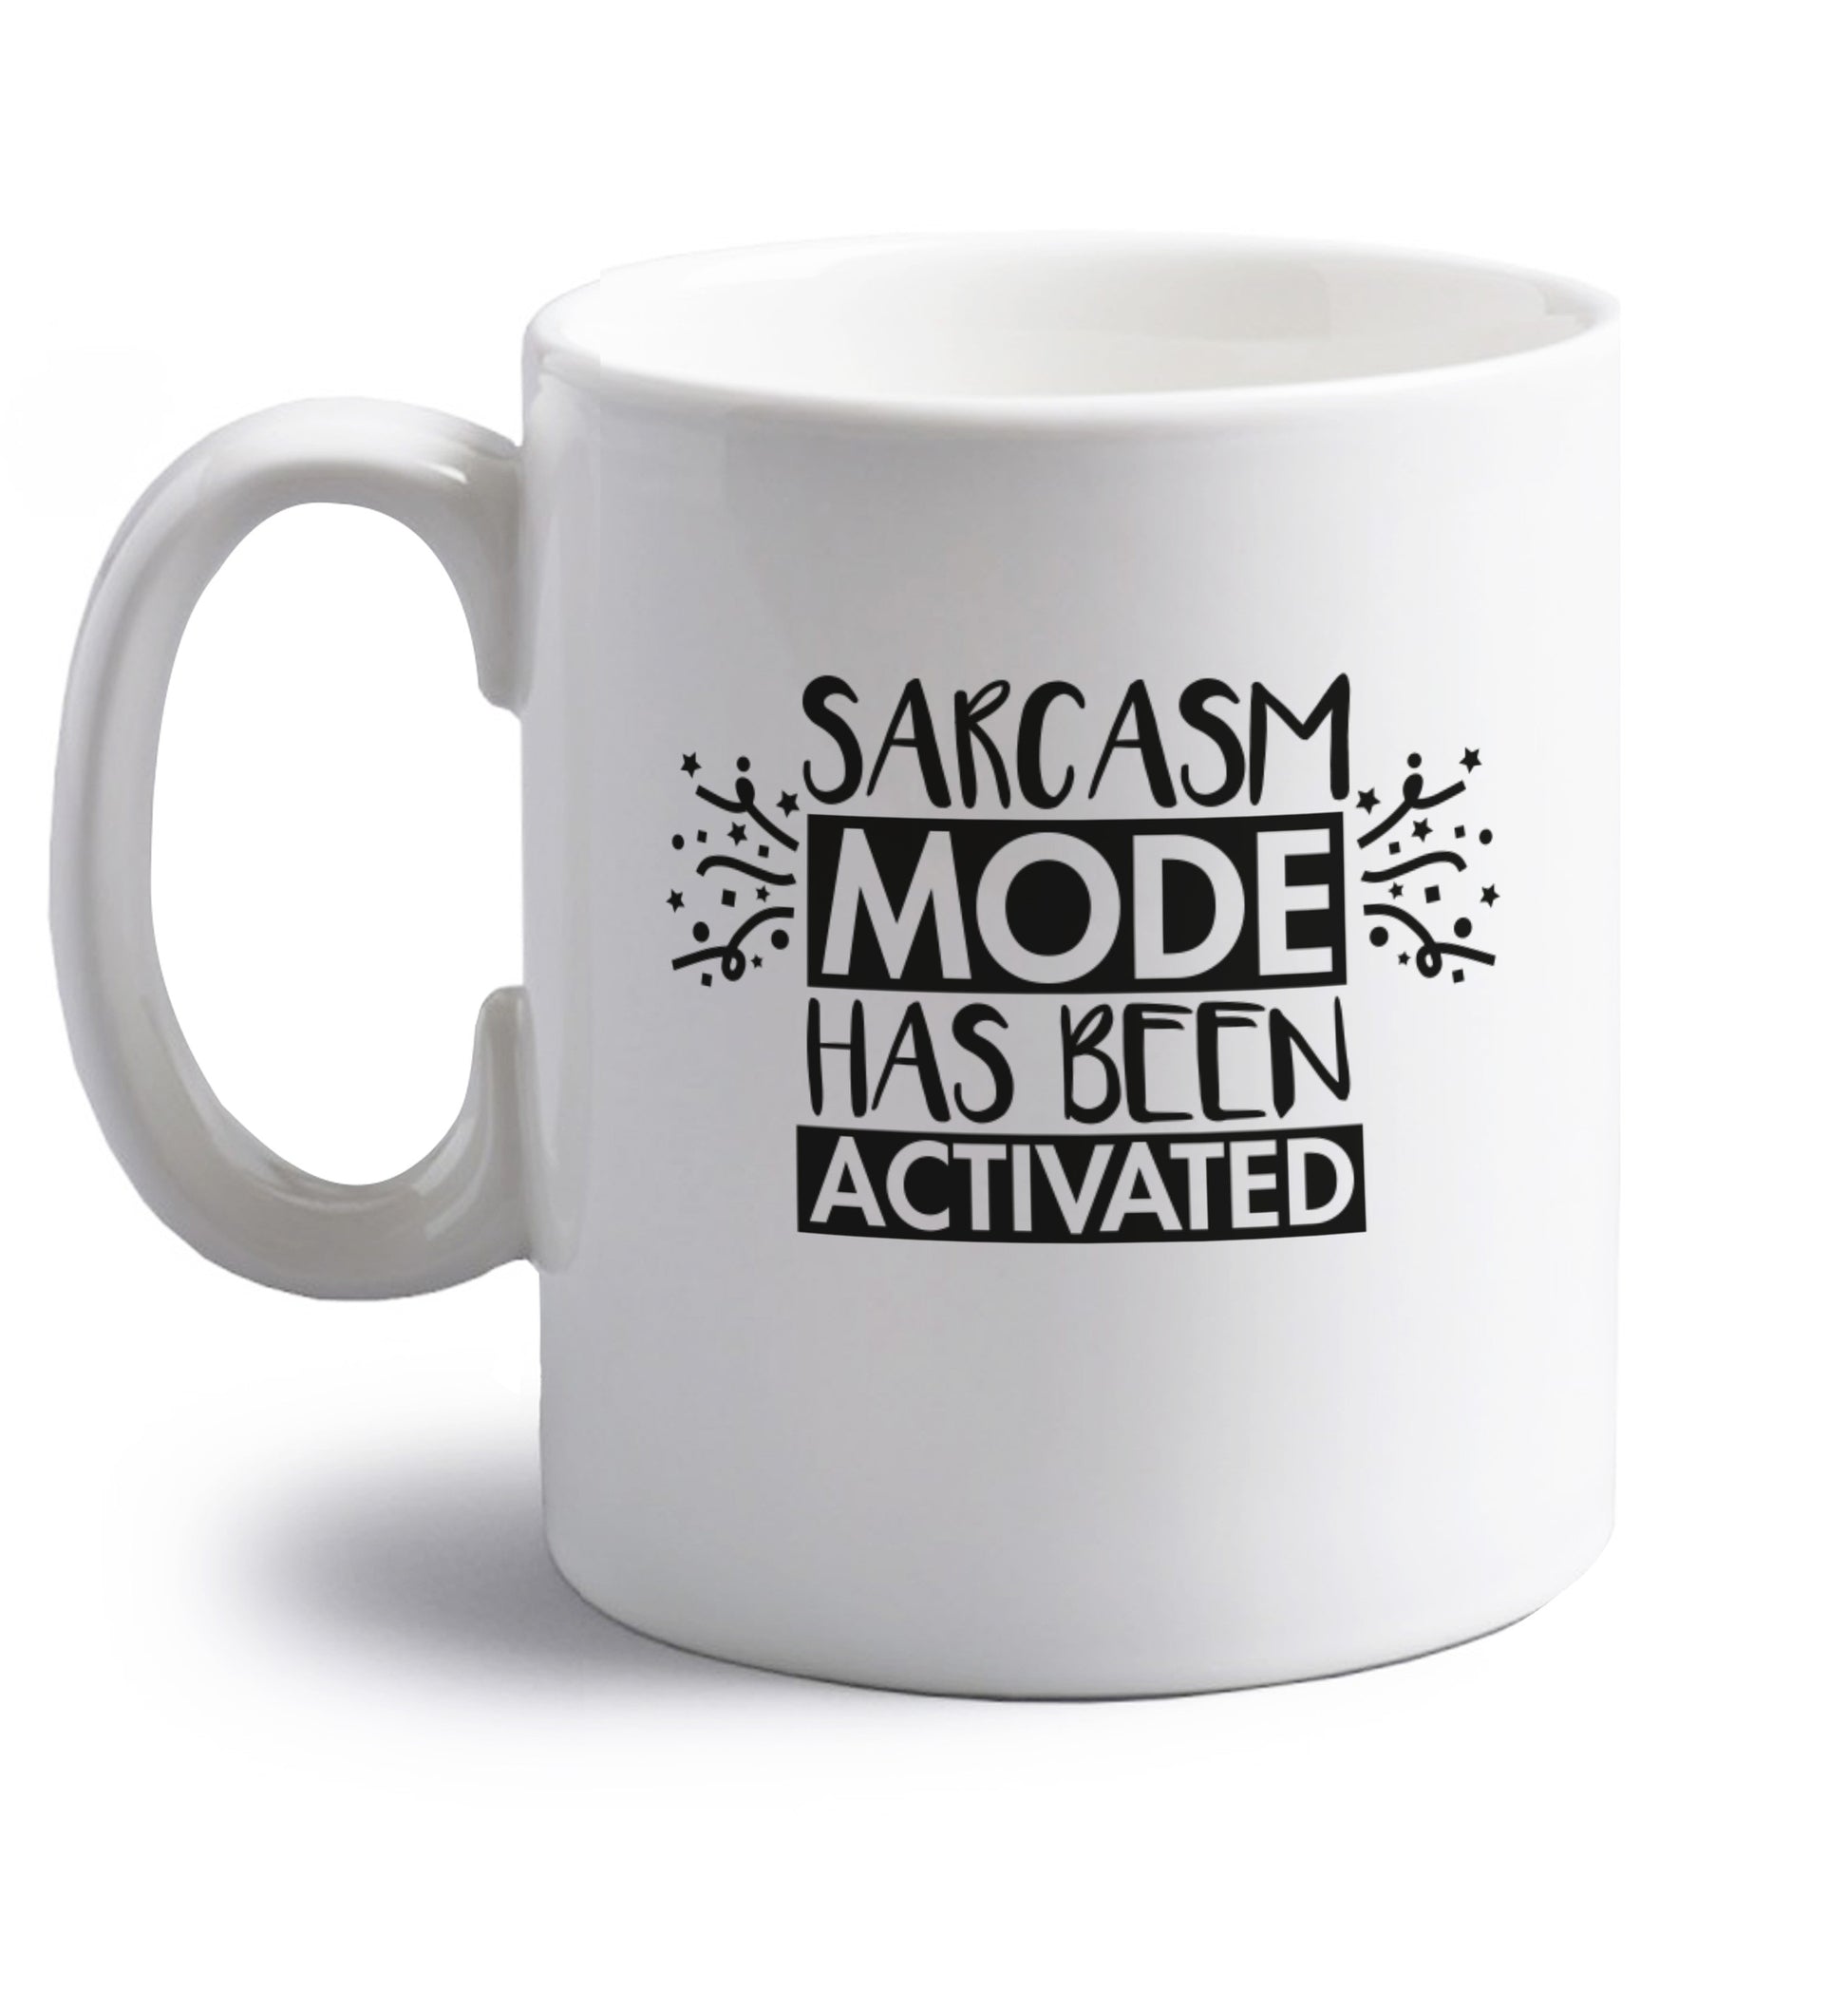 Sarcarsm mode has been activated right handed white ceramic mug 